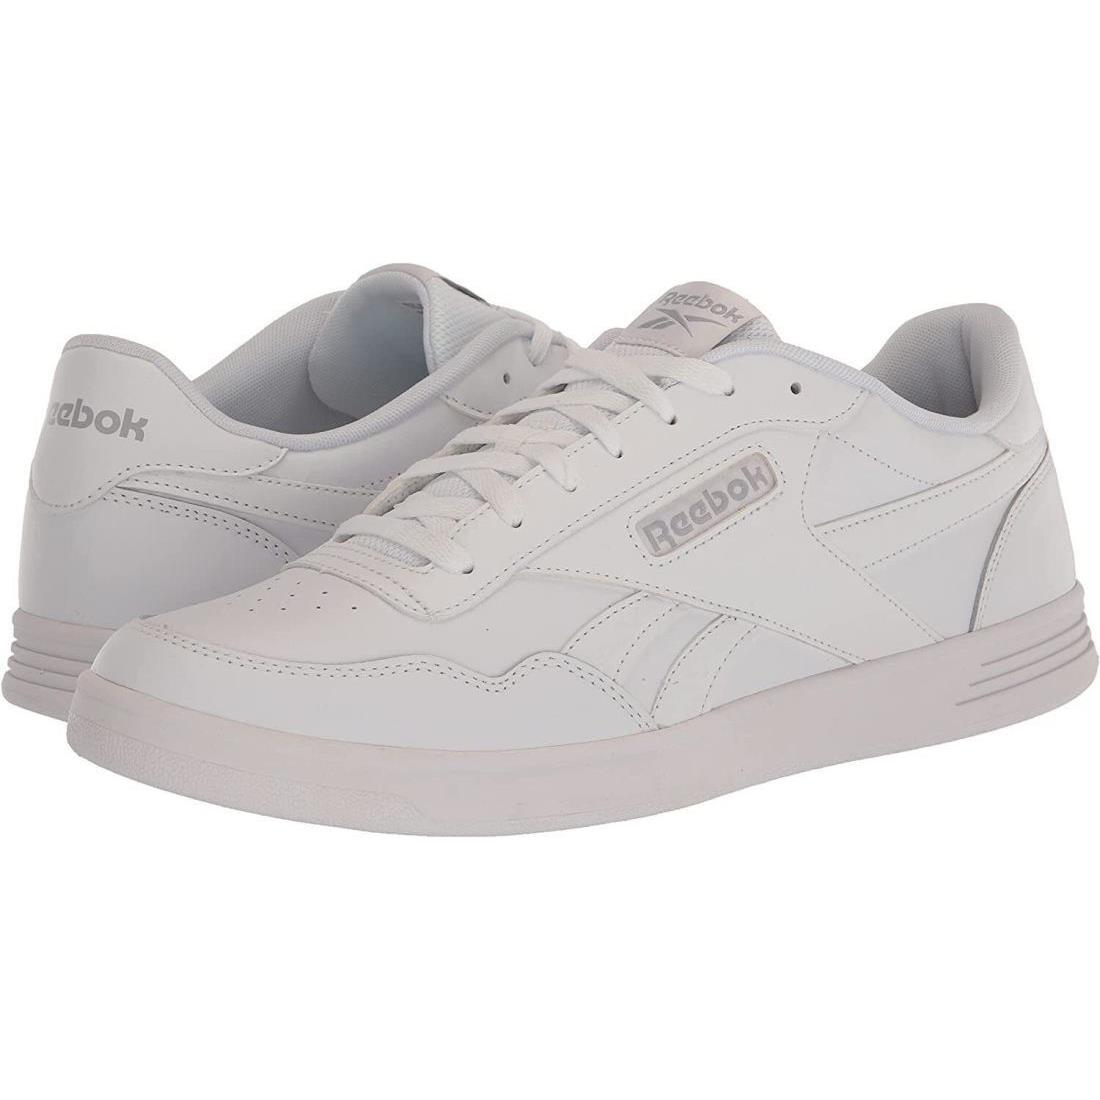 Unisex-adult Reebok Court Advance Sneaker GZ9620 Color White/cold Grey - White/Cold Grey